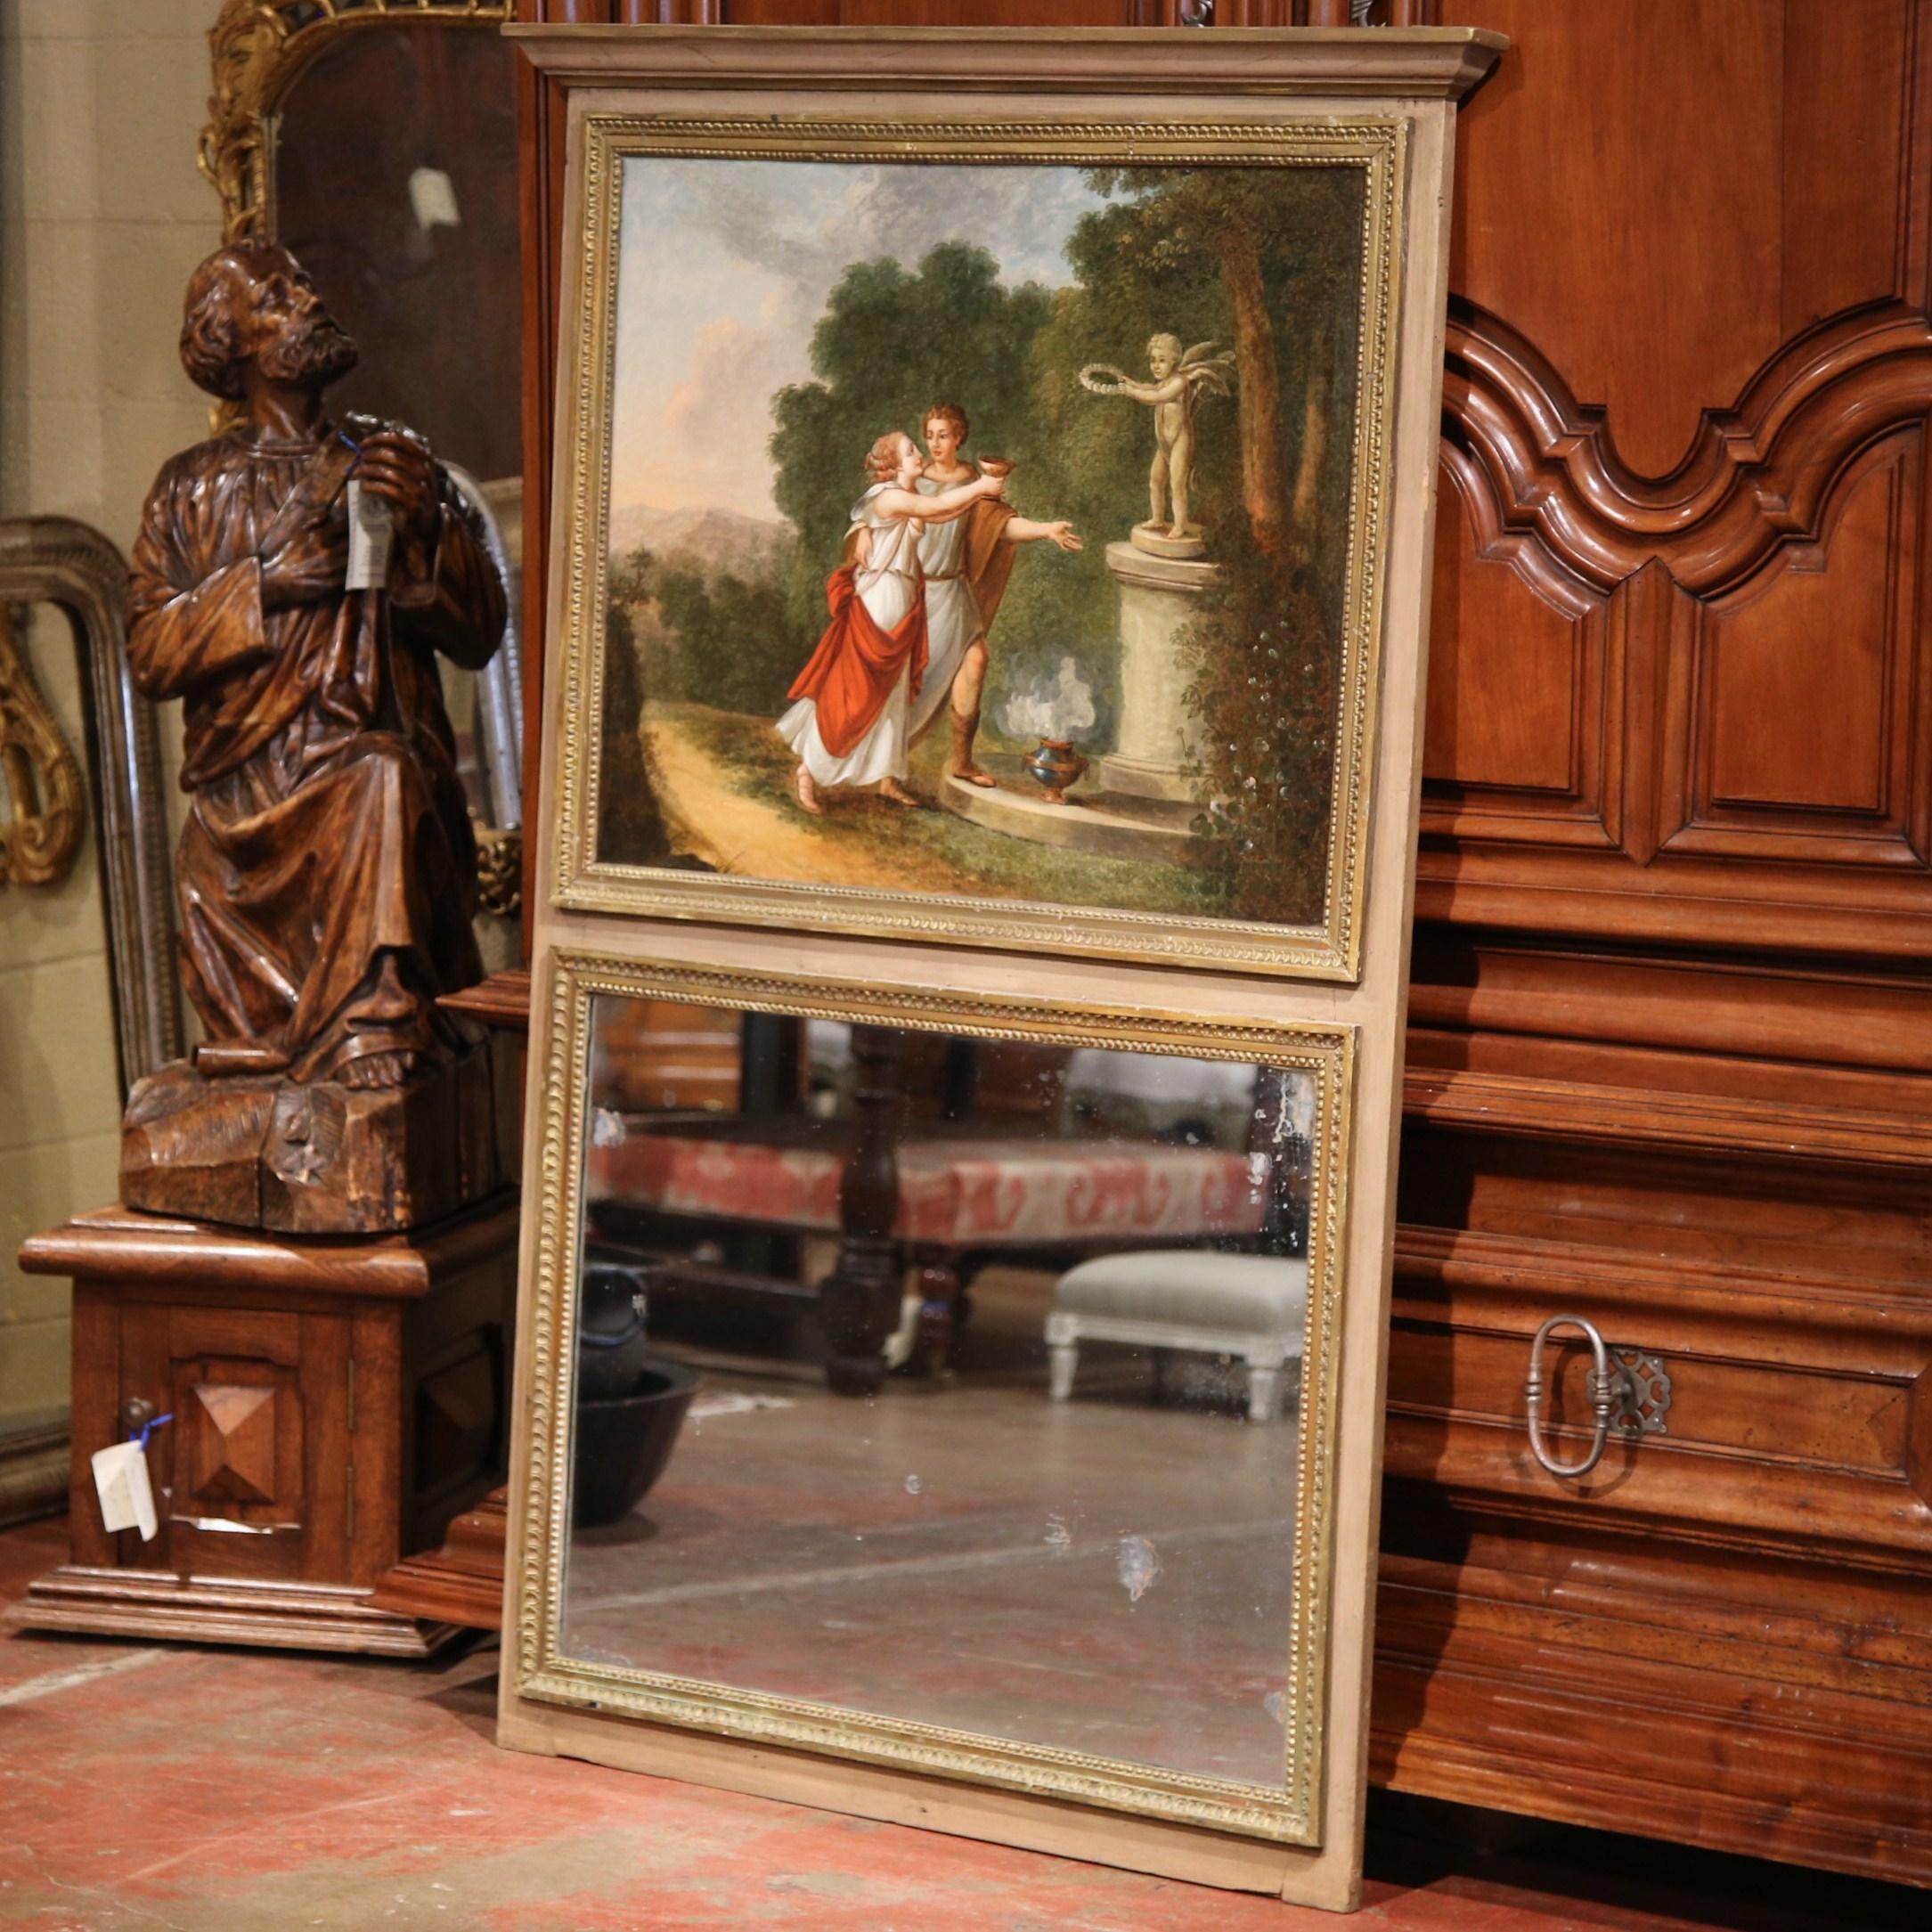 This elegant, antique Trumeau was crafted in Northern France, circa 1870. The long, rectangular mirror is topped with a square, hand painted canvas depicting a mythological scene; the composition shows two people dressed in classical garments in a